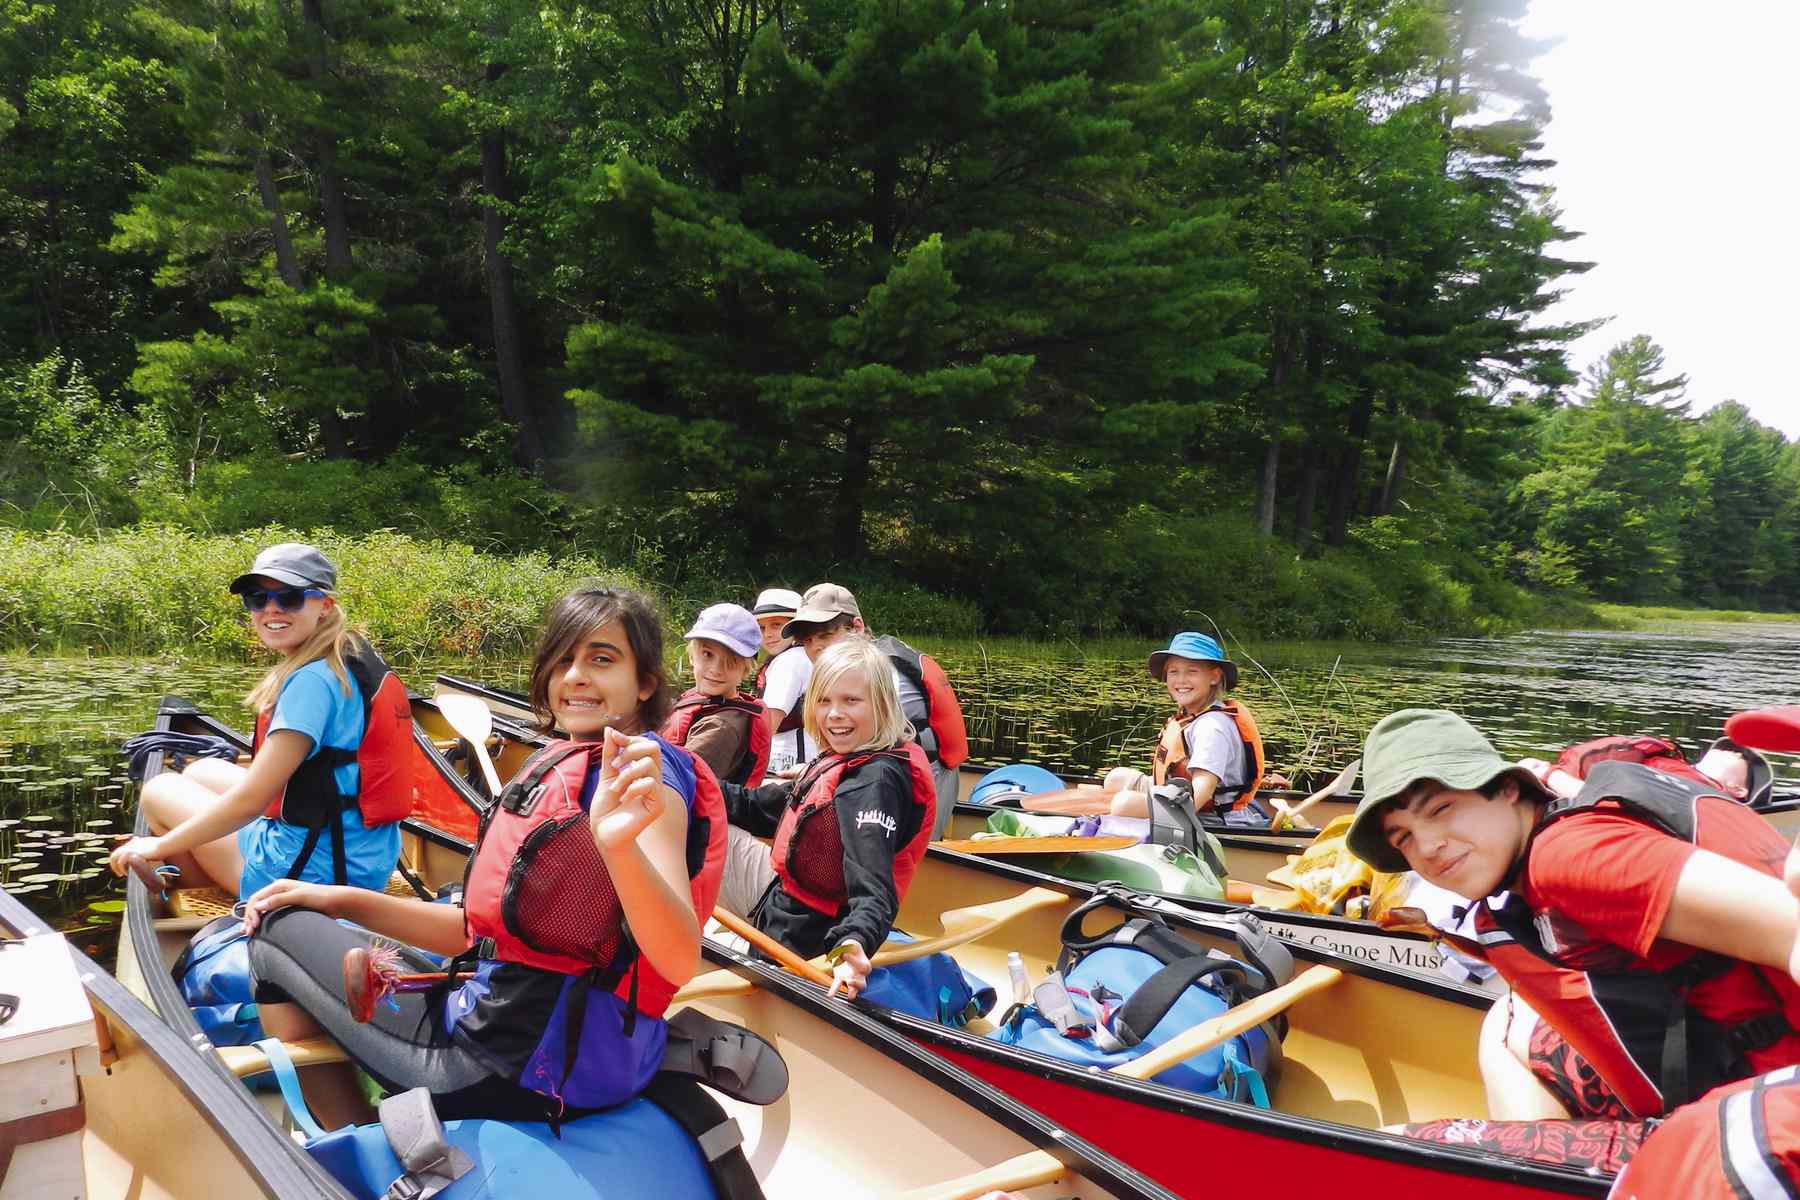 A group of youth and their instructors in three canoes look back and smile and wave at the camera. Their canoes are filled with packs for a canoe trip.